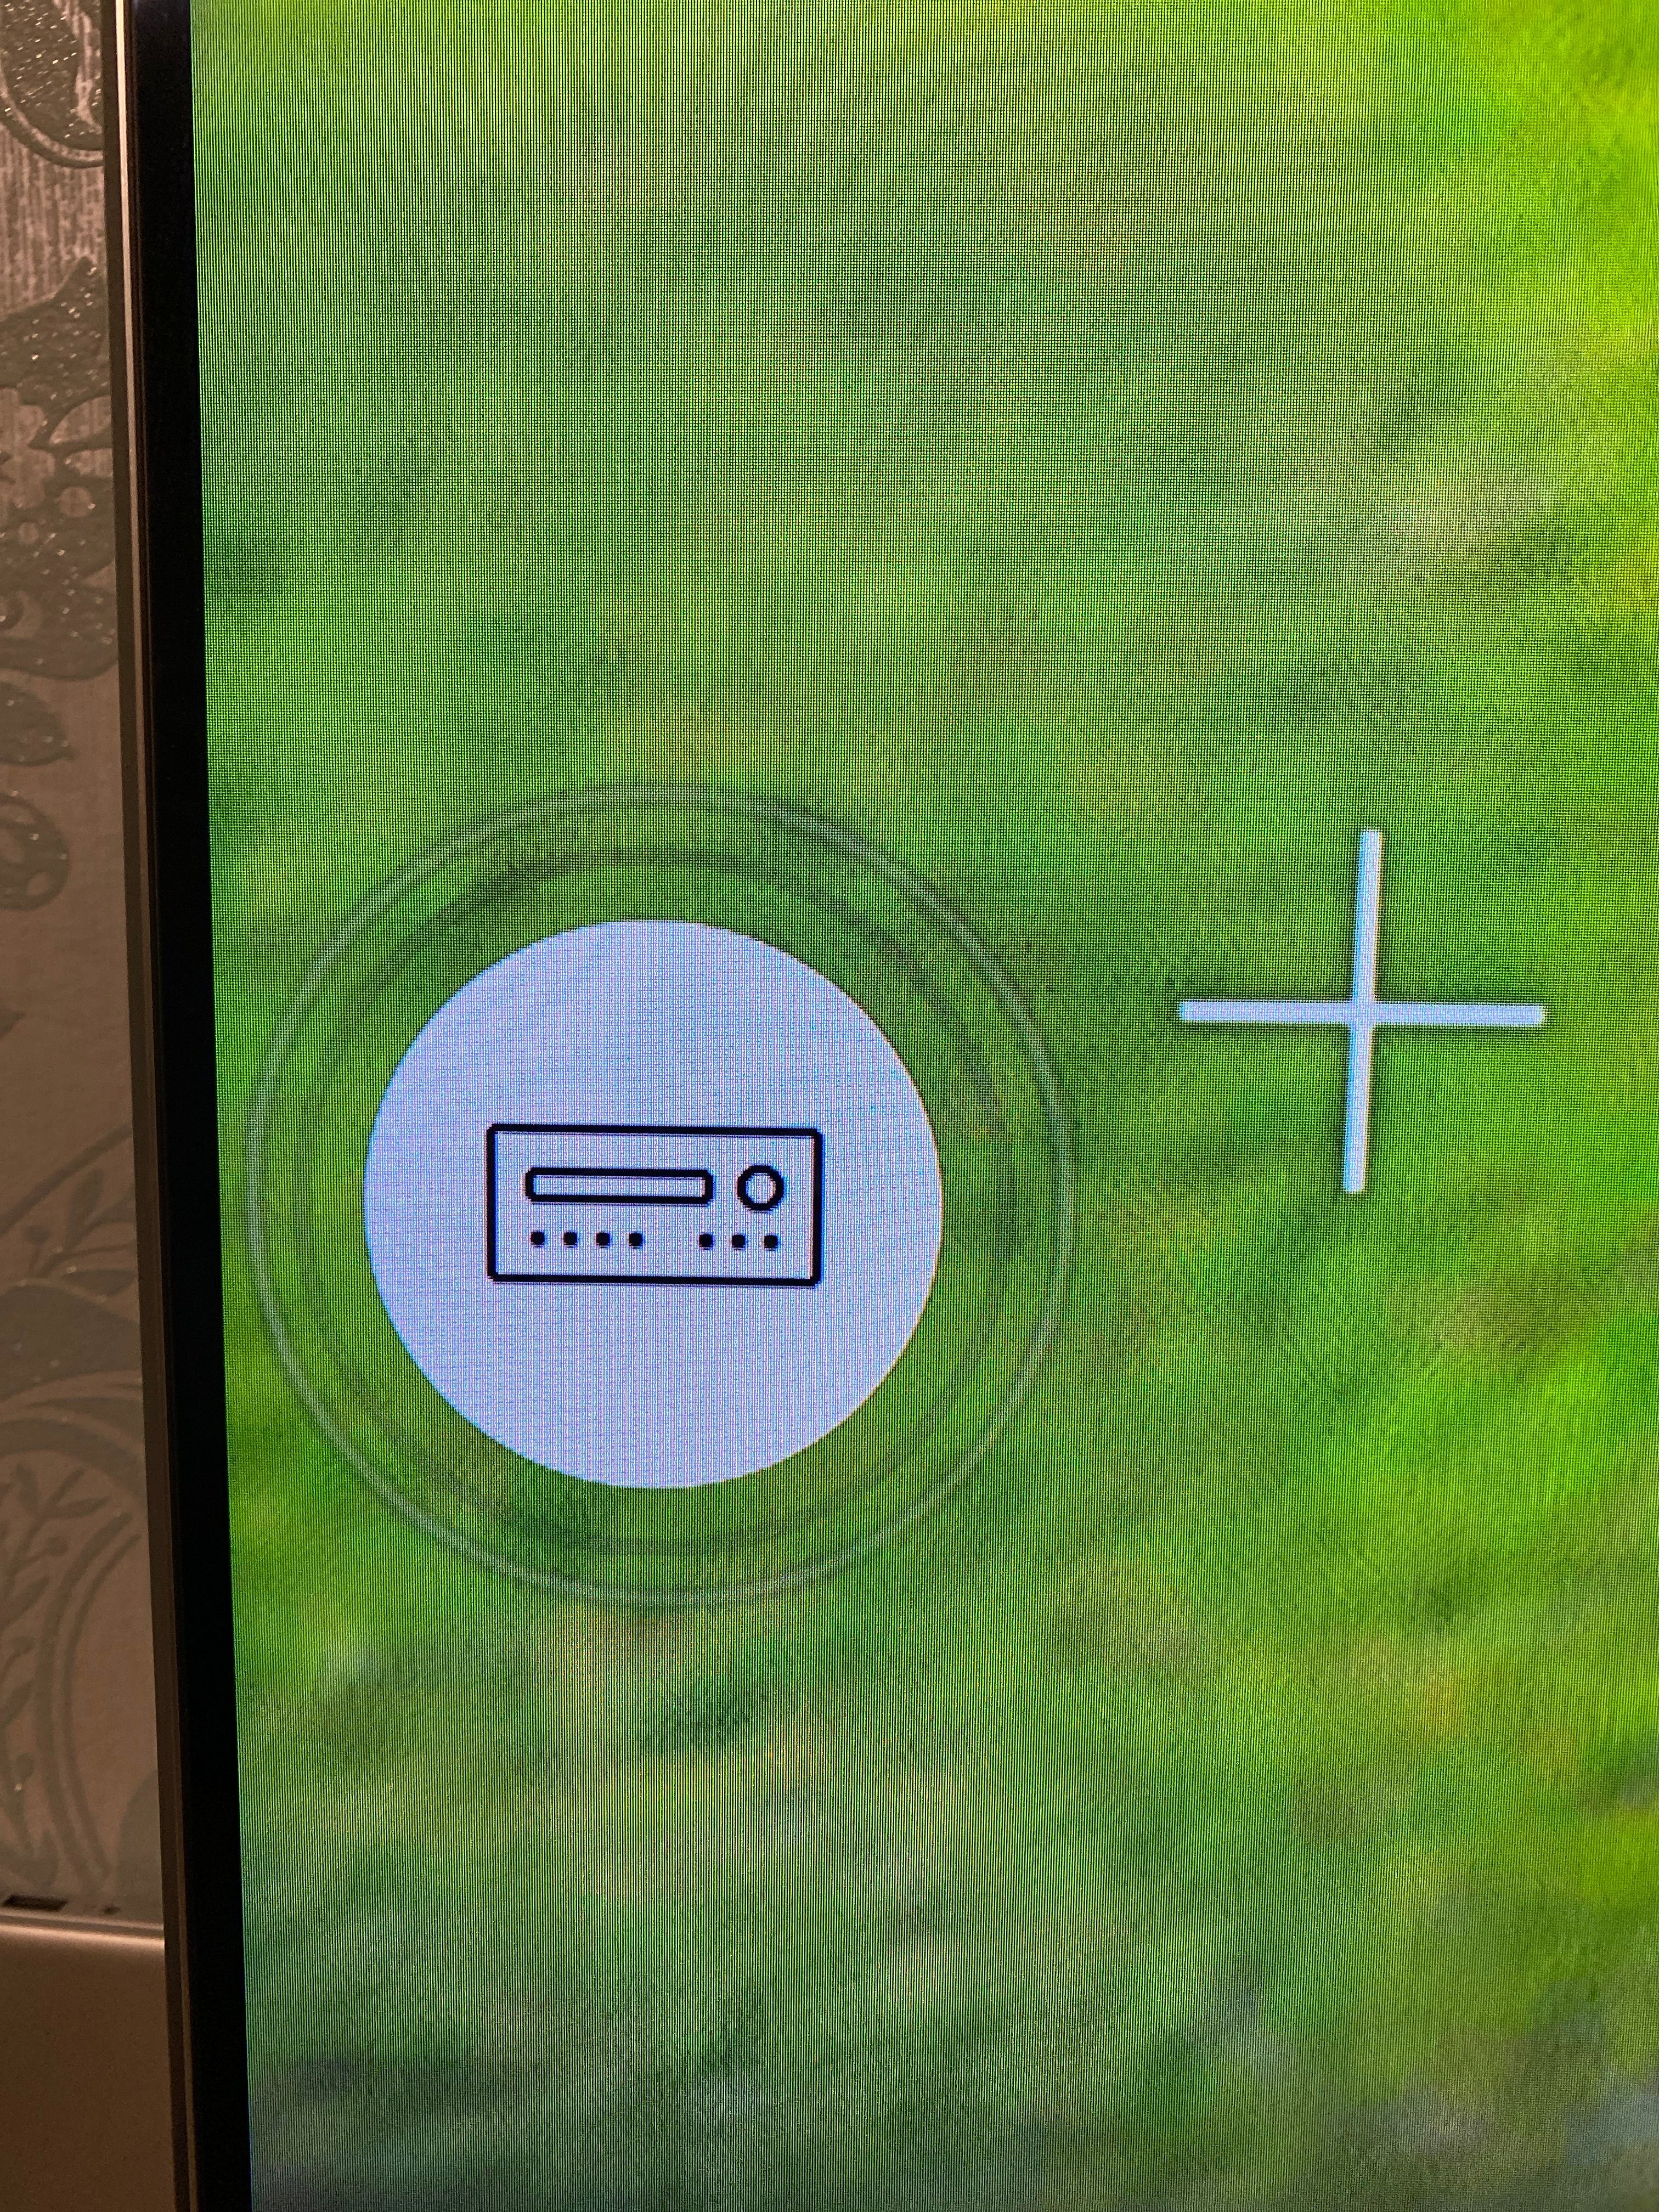 How to Turn off Volume Display on Samsung Tv  